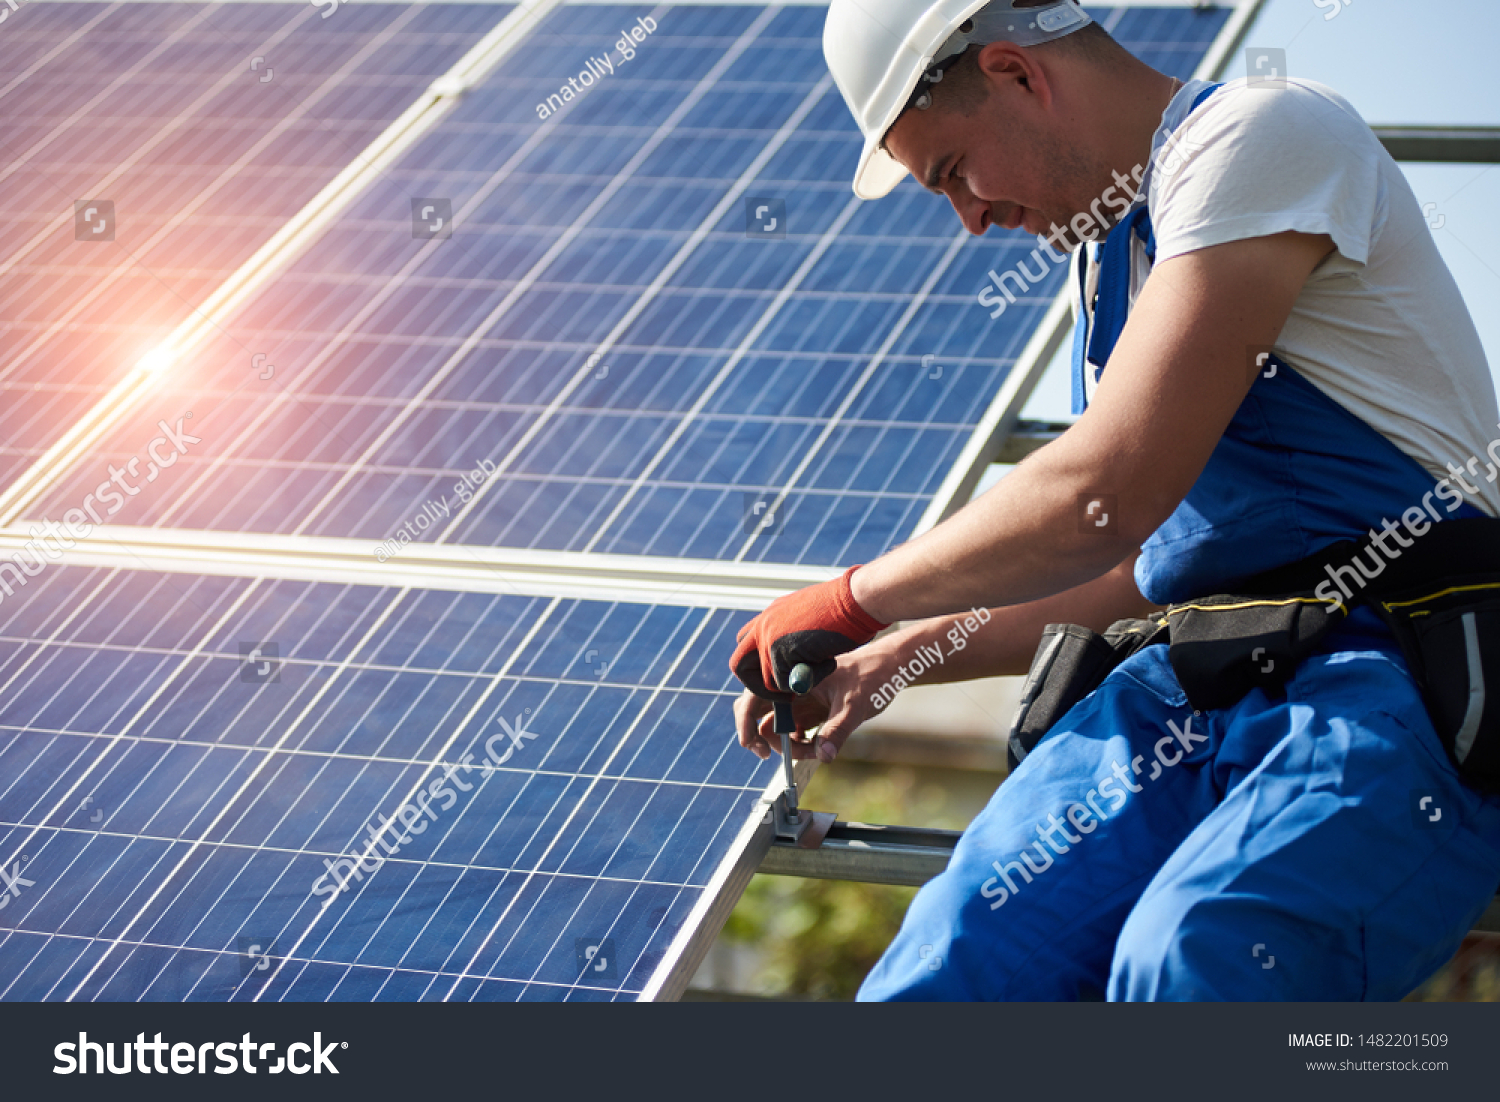 Professional technician connecting solar photo voltaic panel to metal platform using screwdriver. Stand-alone solar panel system installation, efficiency and professionalism concept. #1482201509